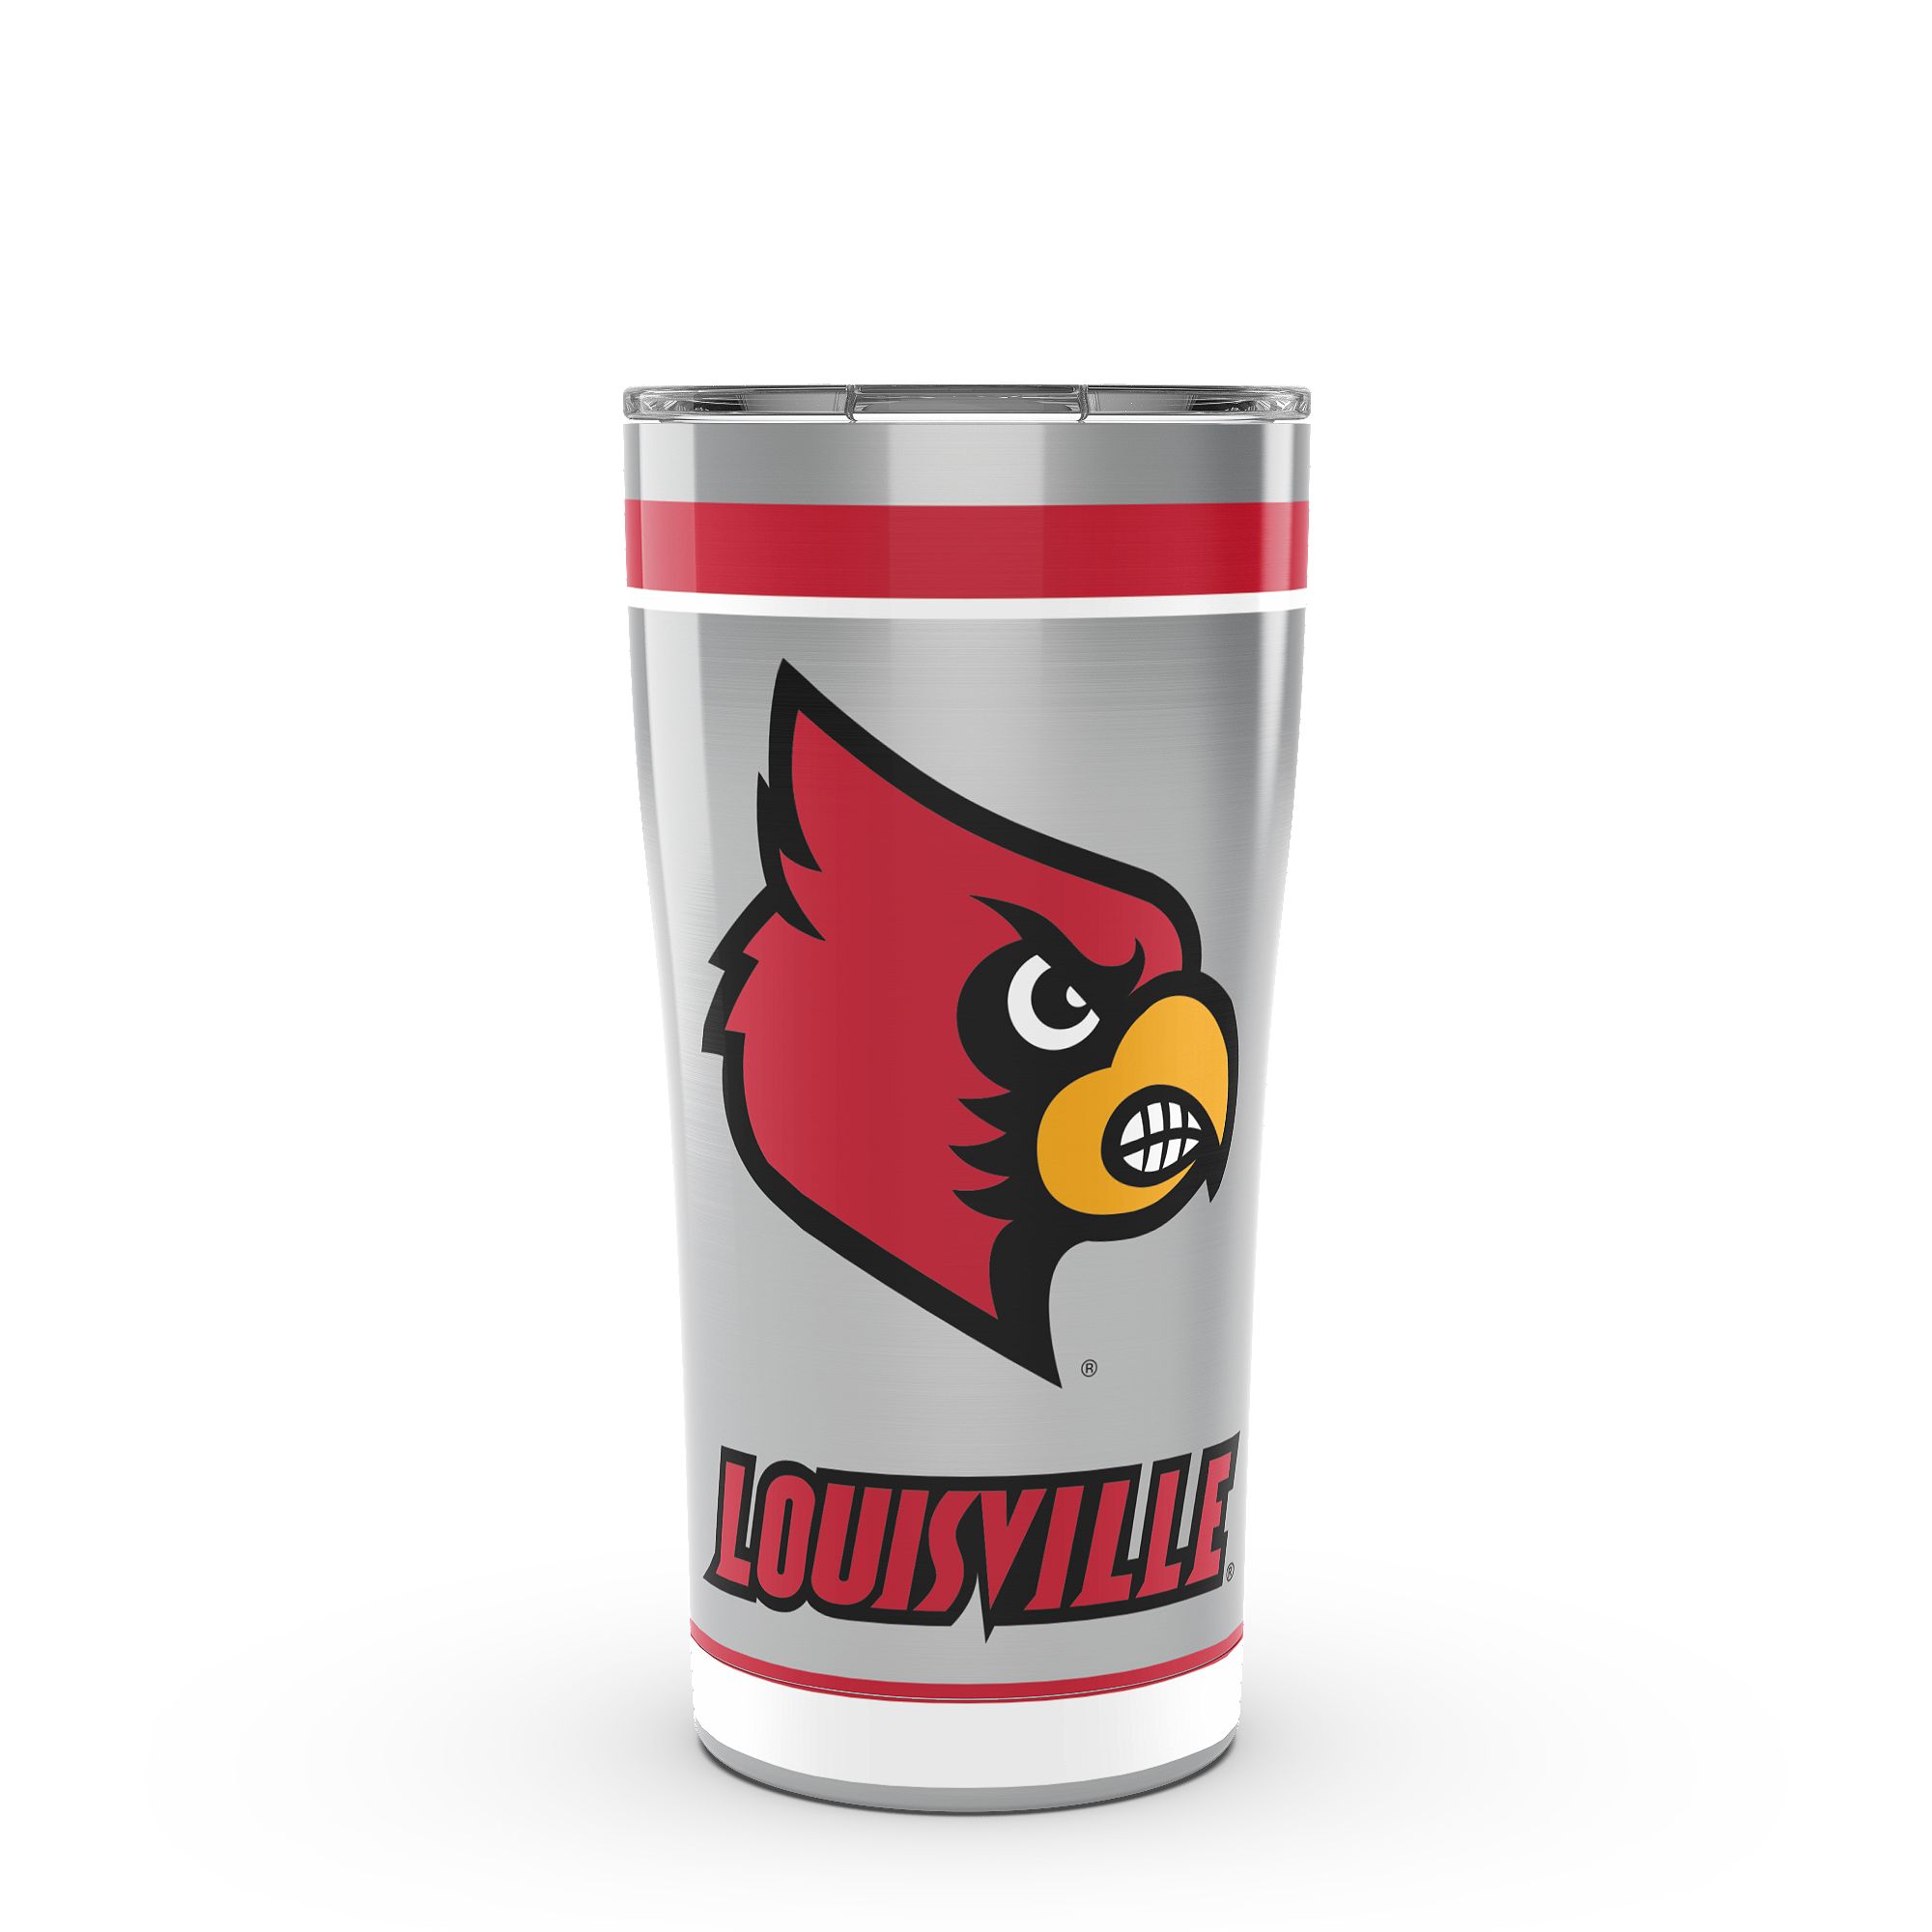 Tervis Louisville Cardinals Tradition 20oz Stainless Steel Tumbler with Lid